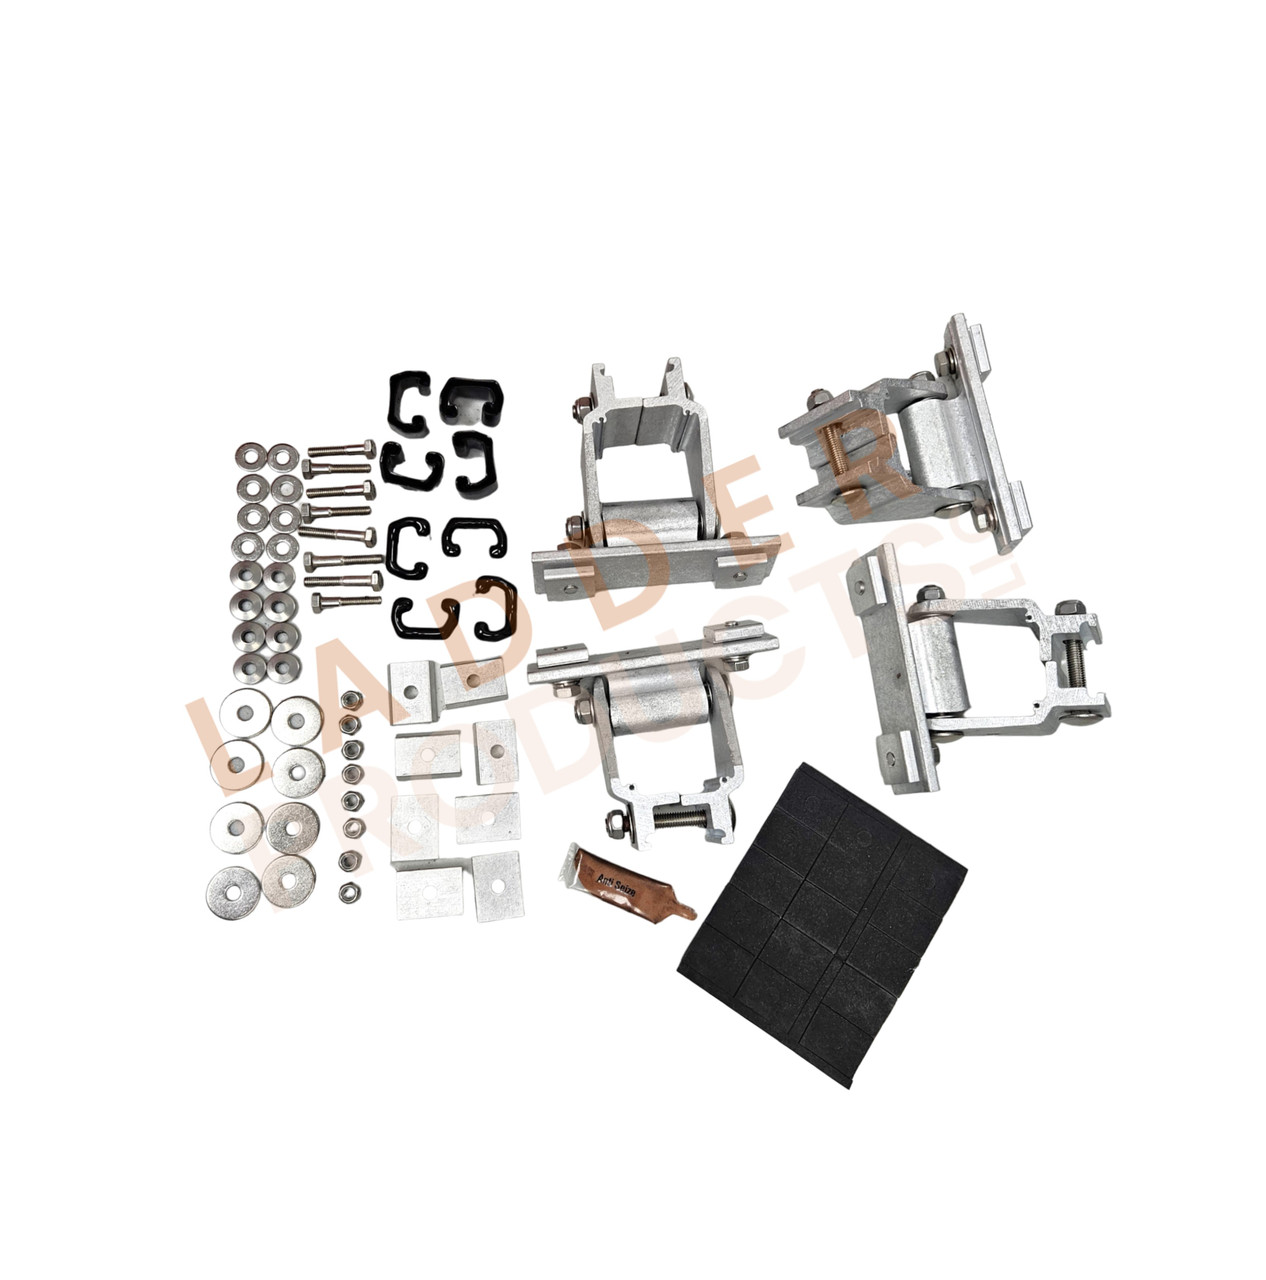 LadderProducts.com | Prime Design FBM-1012 Ford Transit Connect Roof Mounting Kit